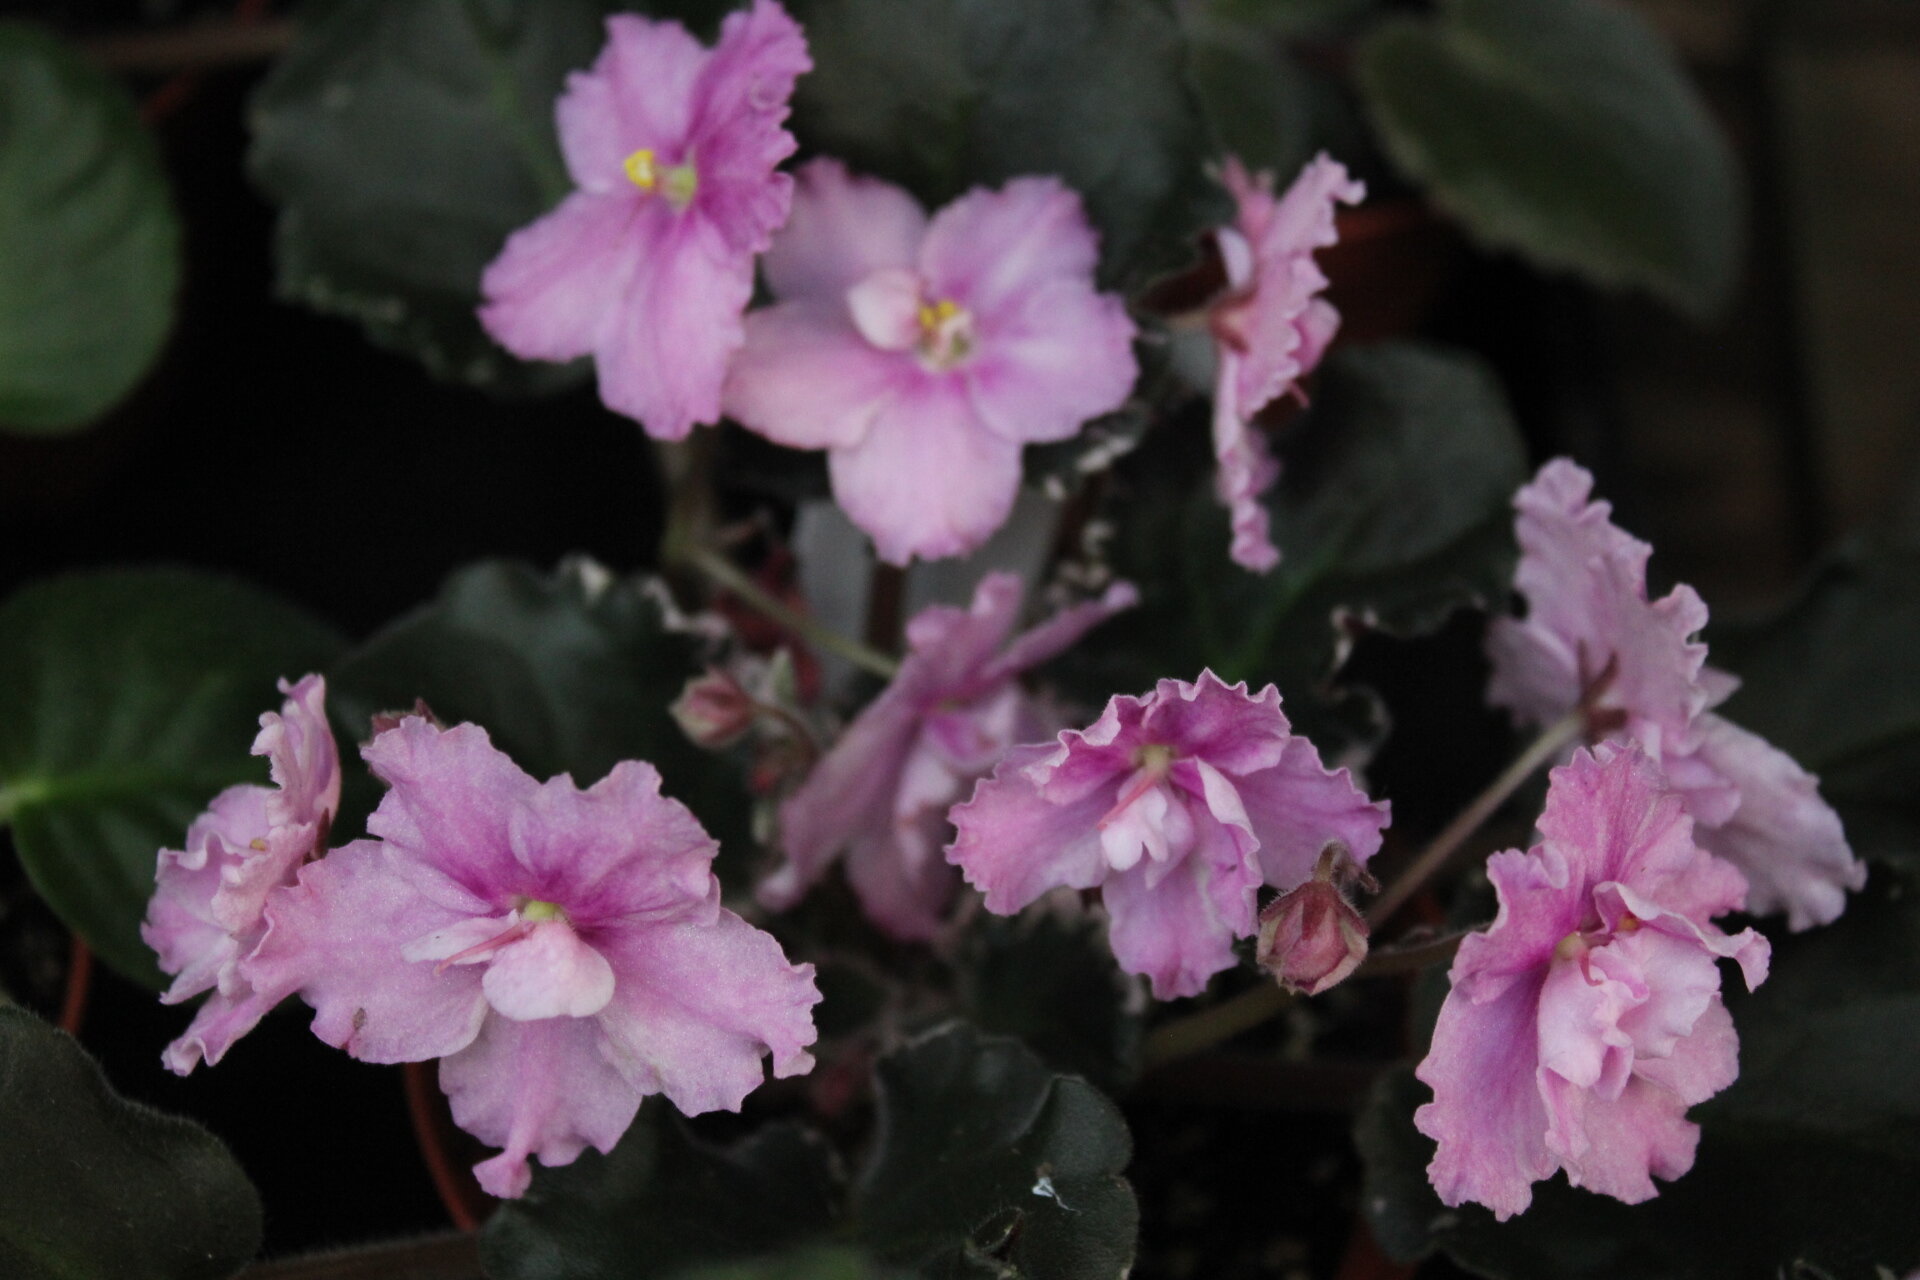 Don’t forget the indoor blooms. My African violets have been showing off these last few weeks, blooming their little heads off. African violets are easy to grow, but if you find you’re having trouble, check out this video from Espoma .